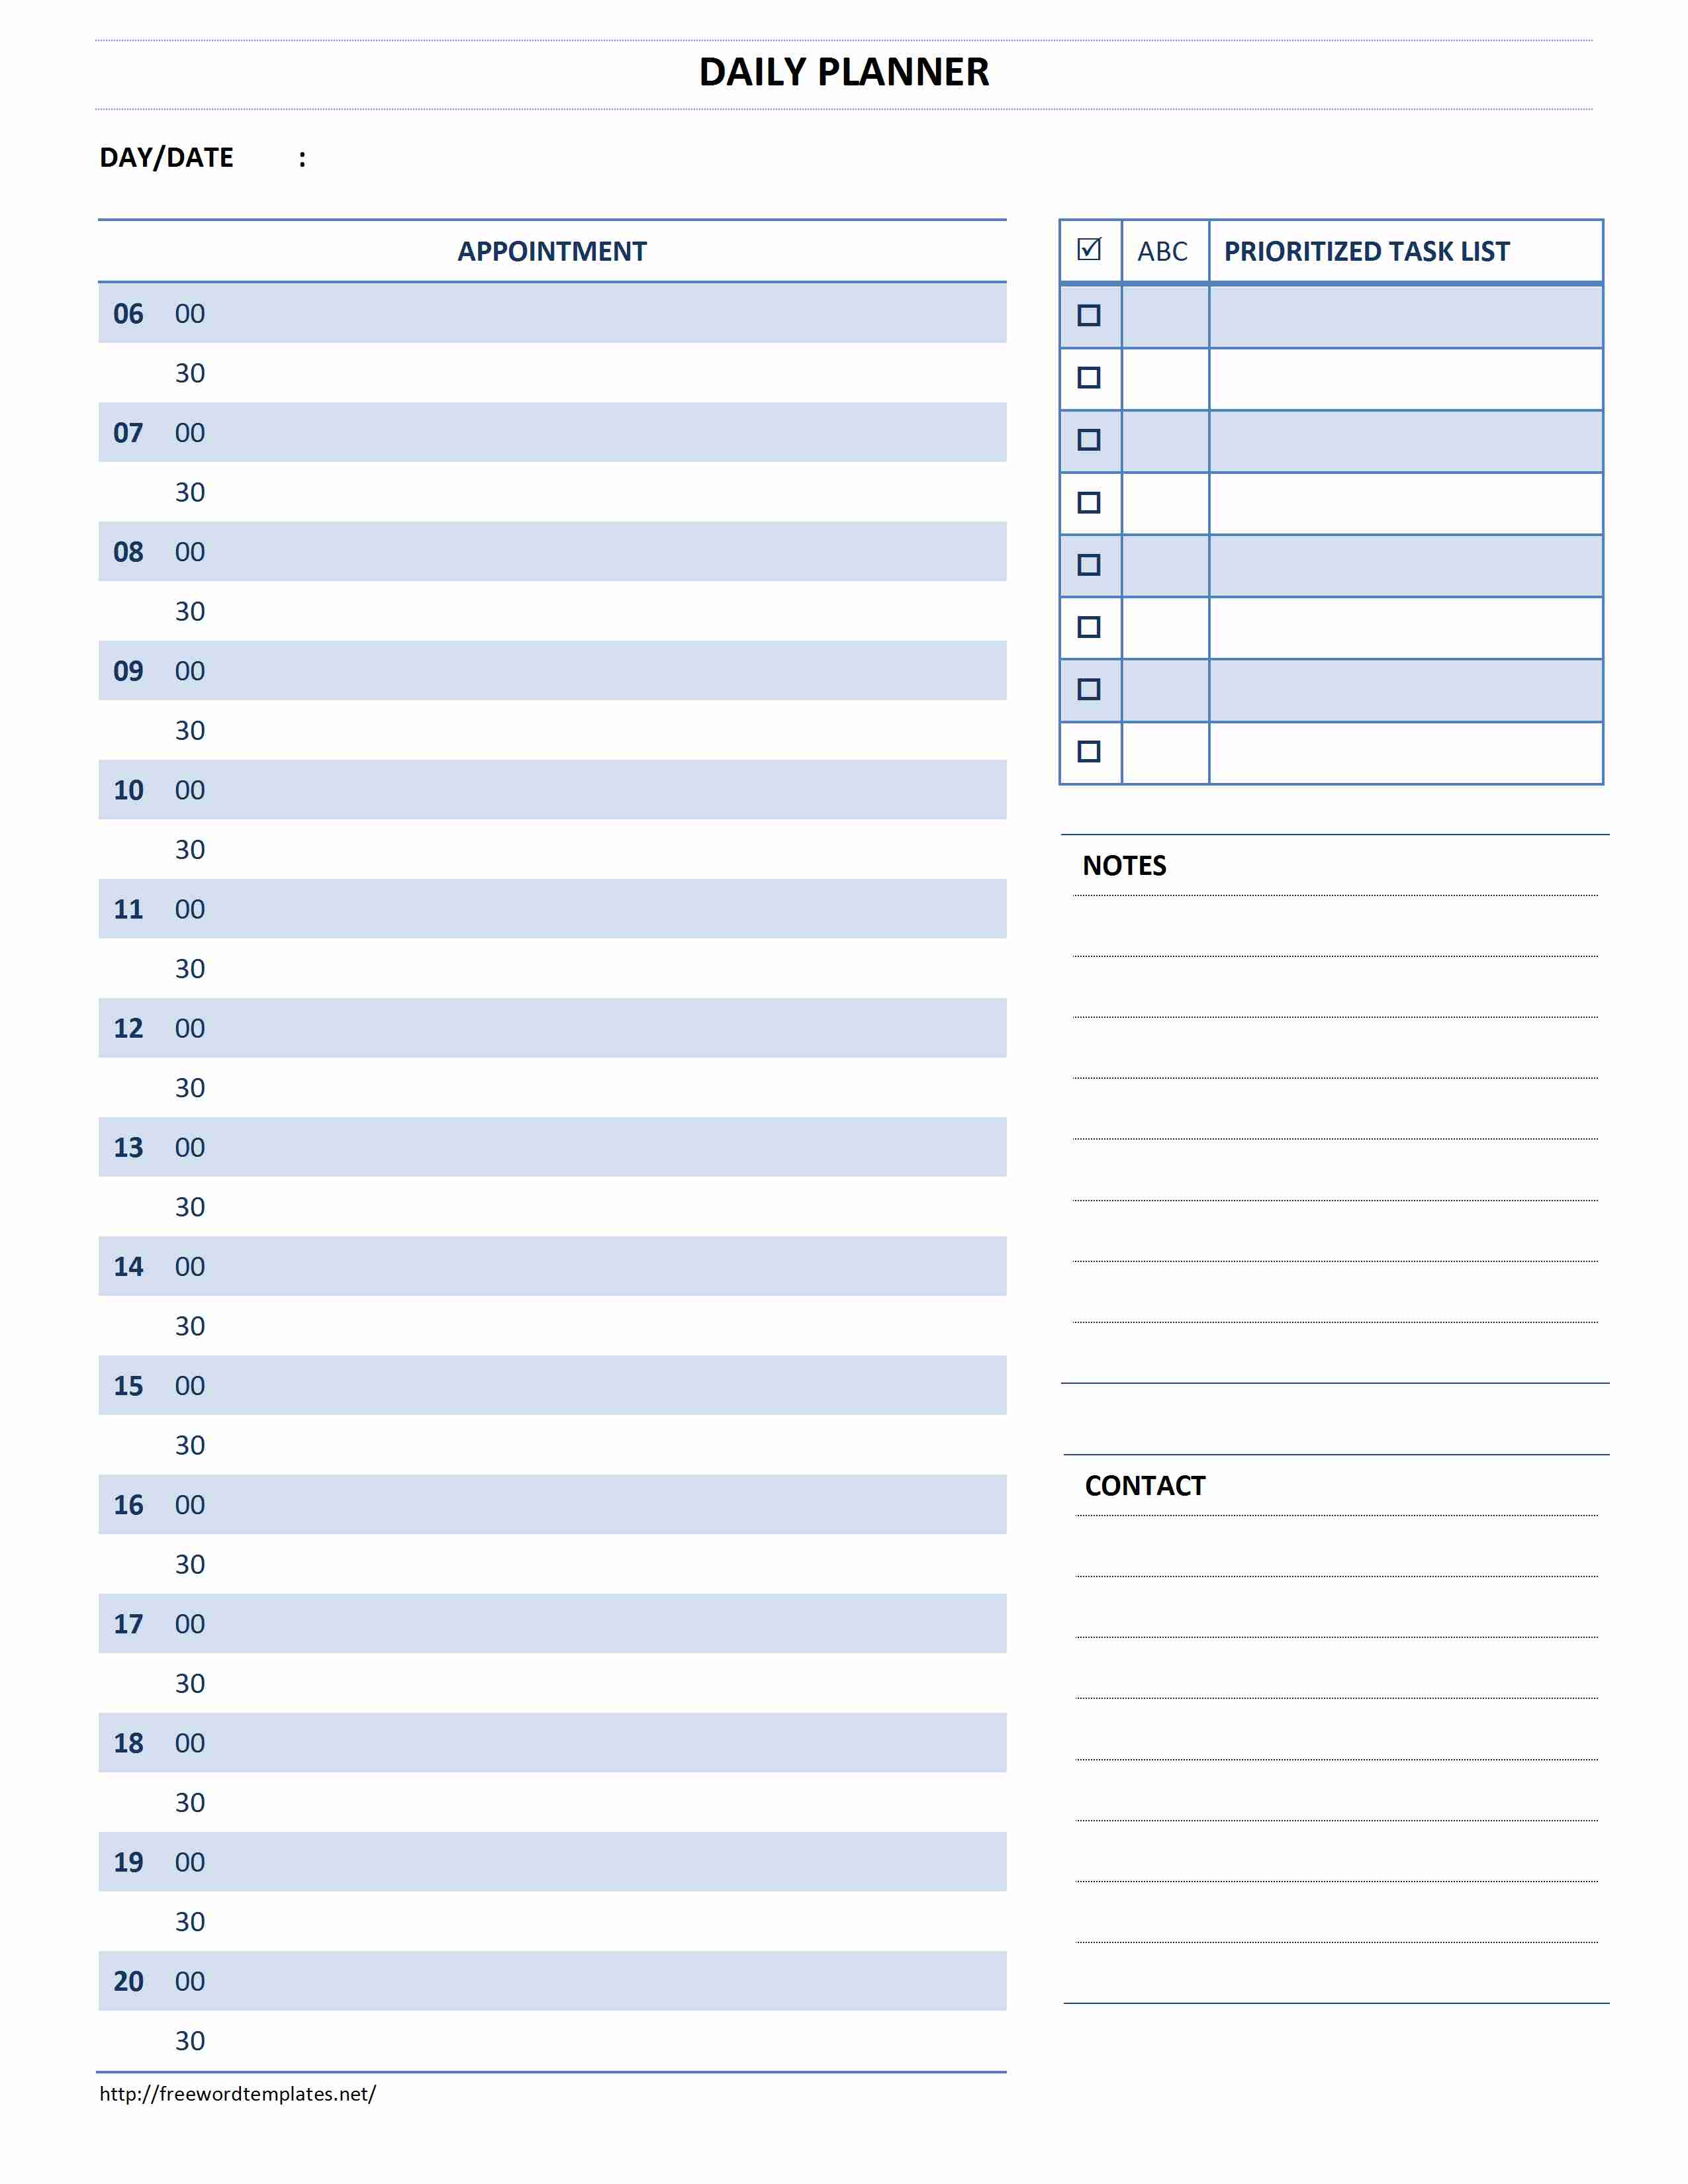 Daily Planner Template for Word